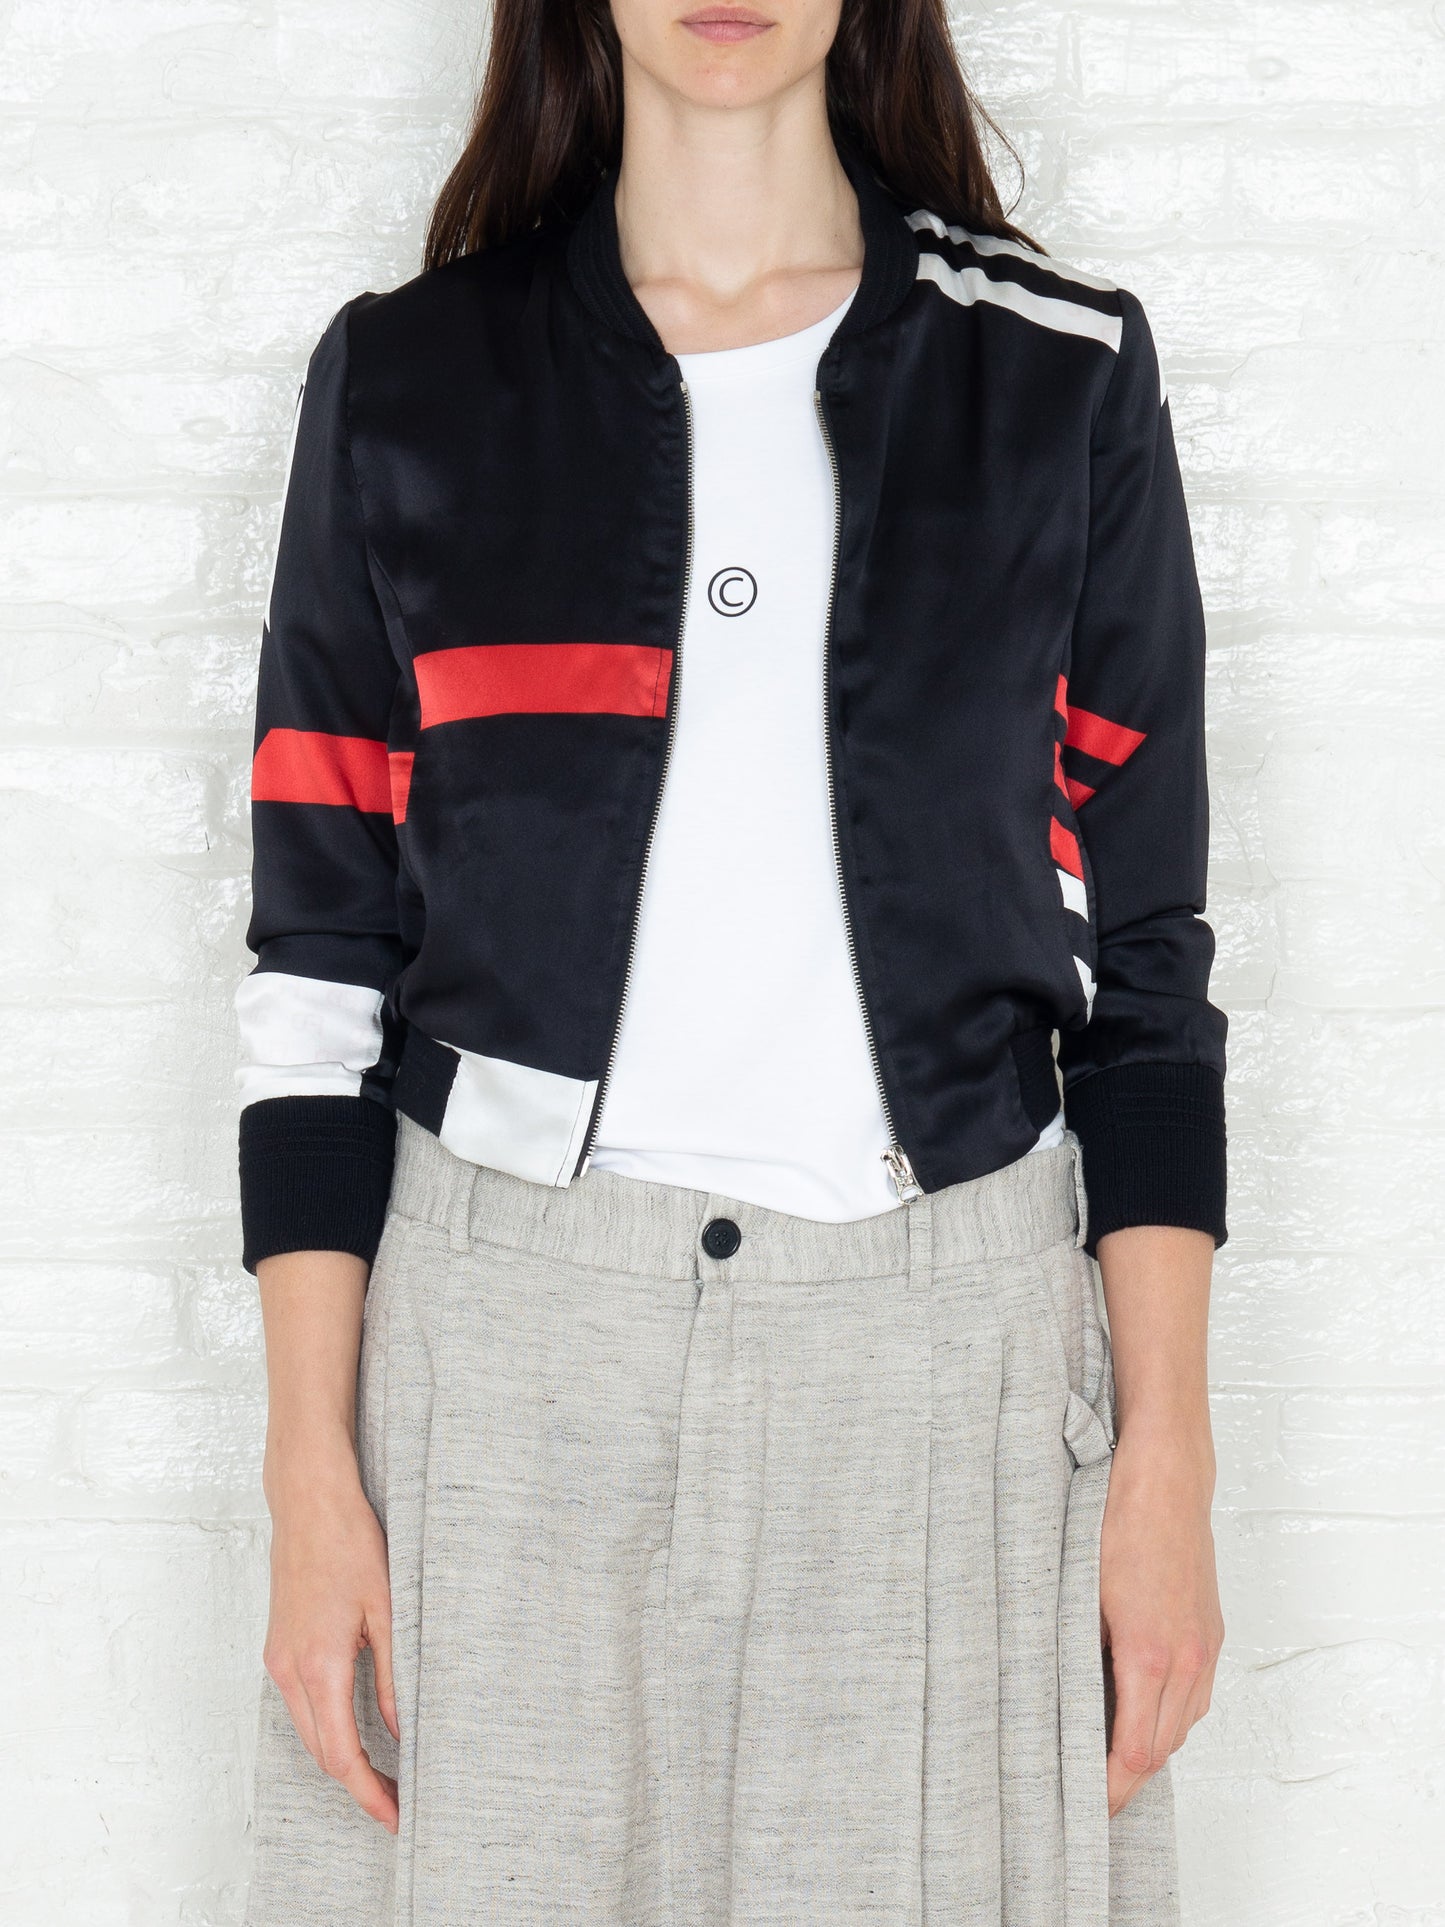 "The Classic Bomber" 3/4 in Black White and Red